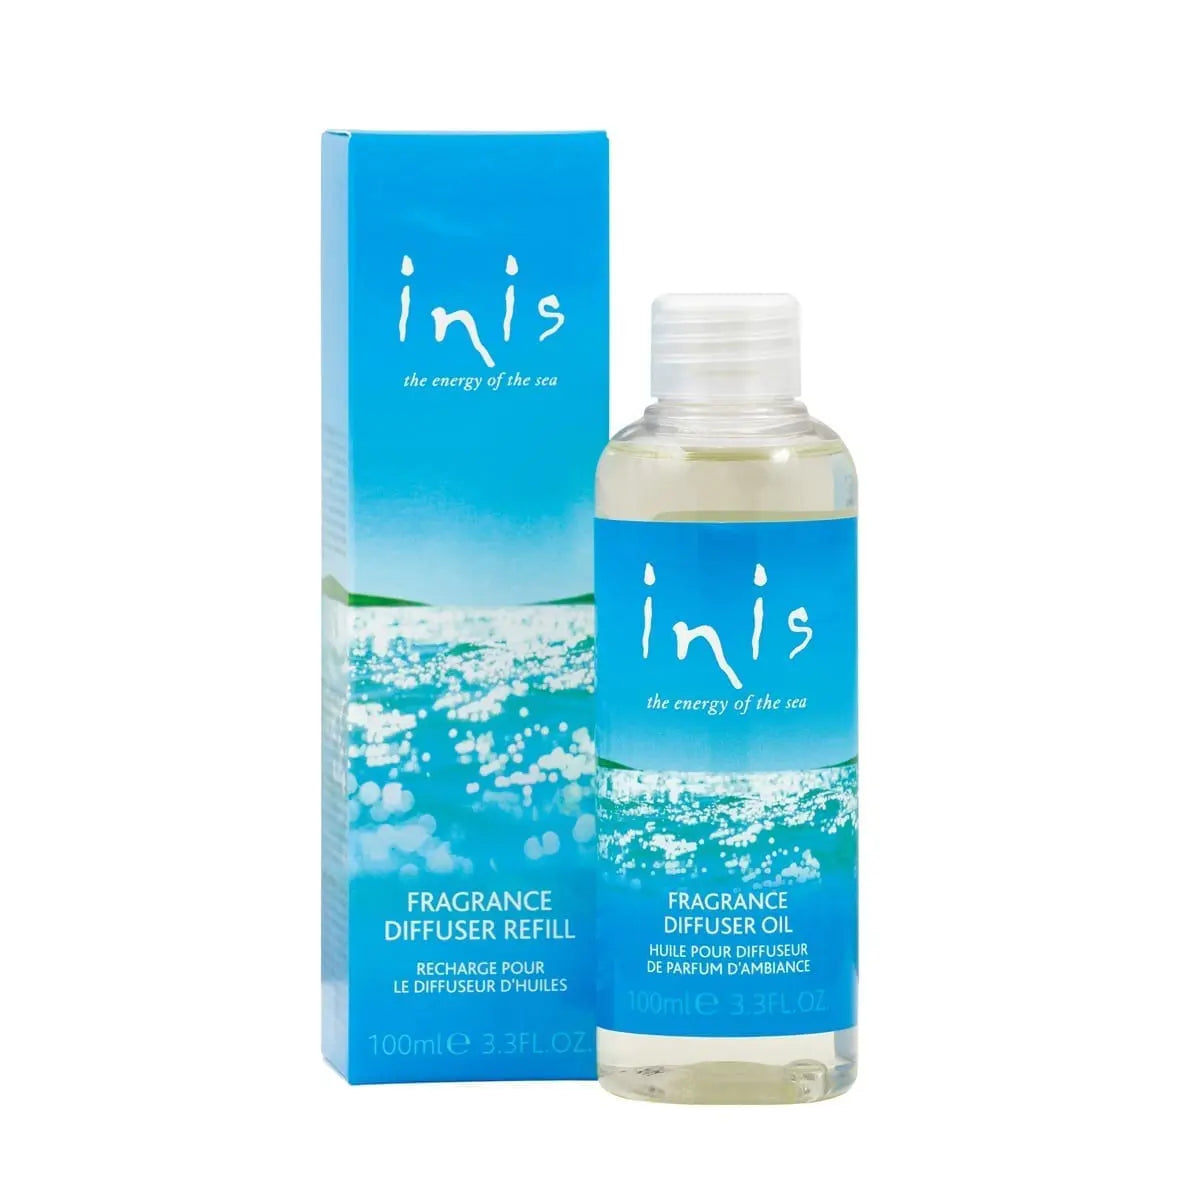 INIS - FRAGRANCE DIFFUSER REFILL